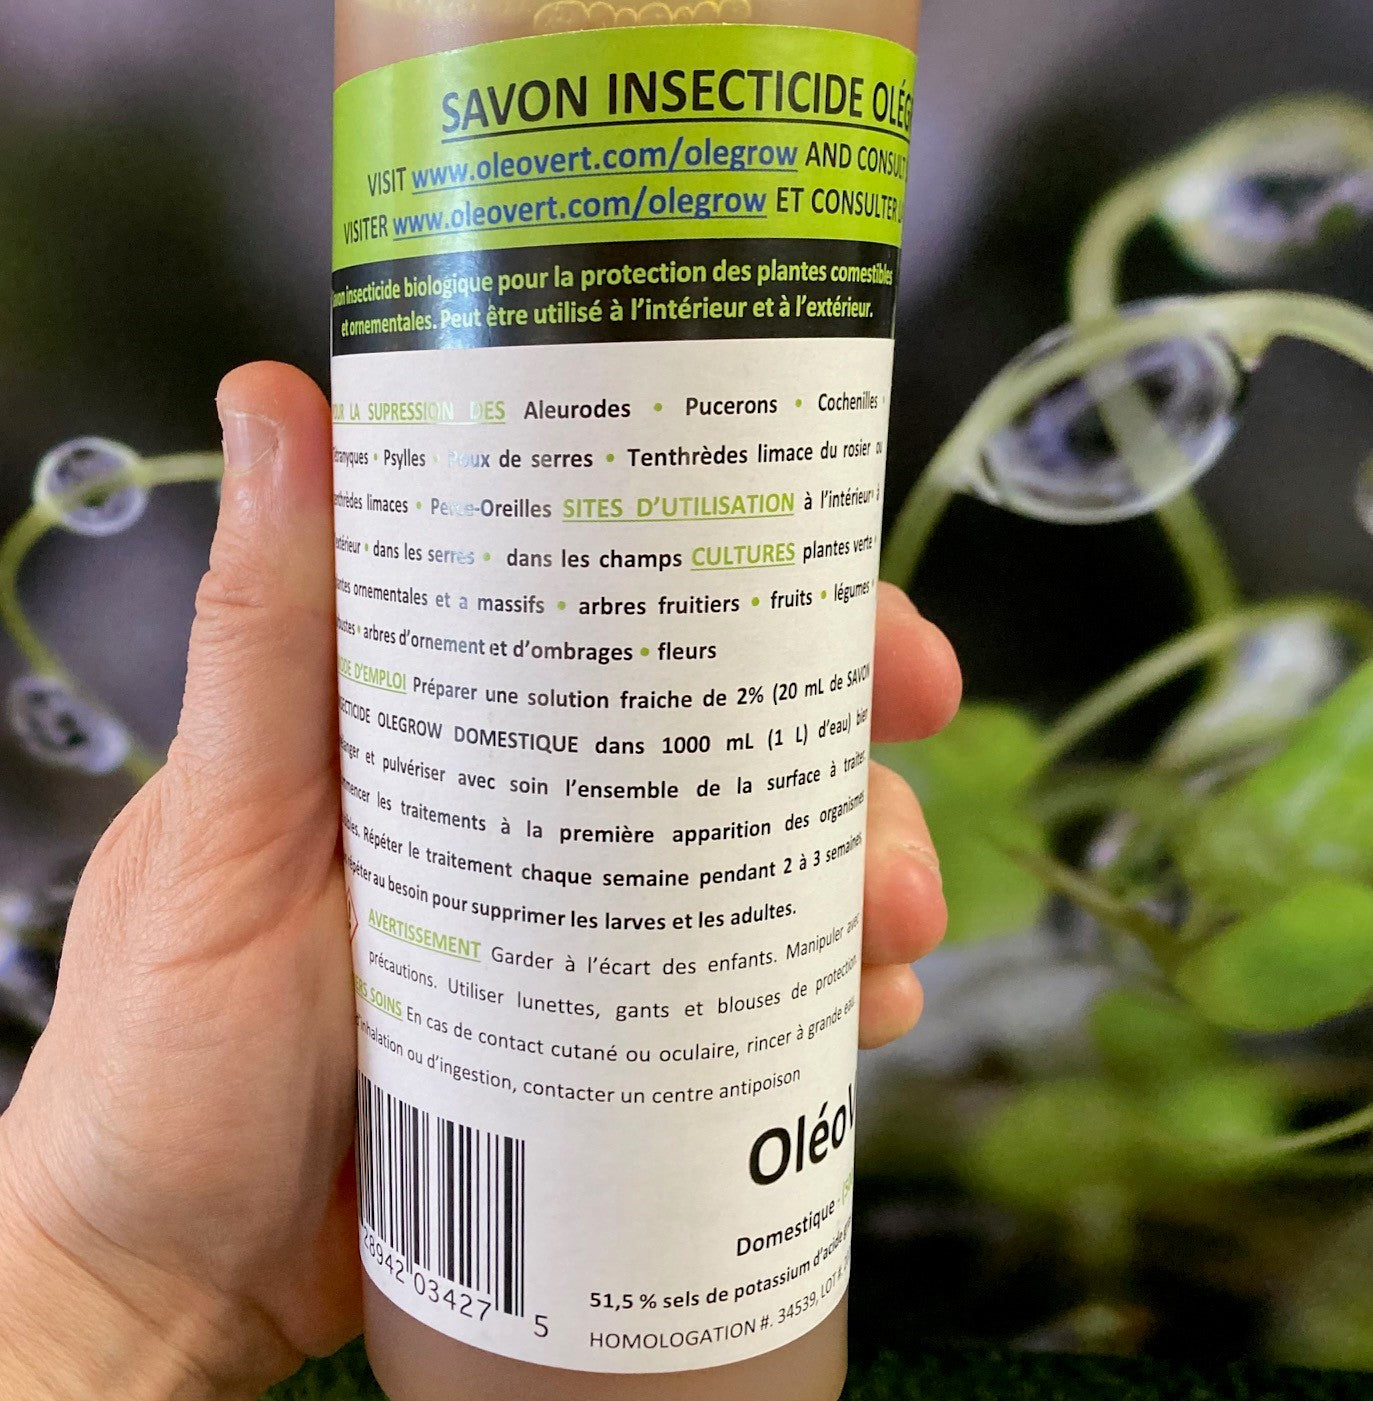 Savon insecticide